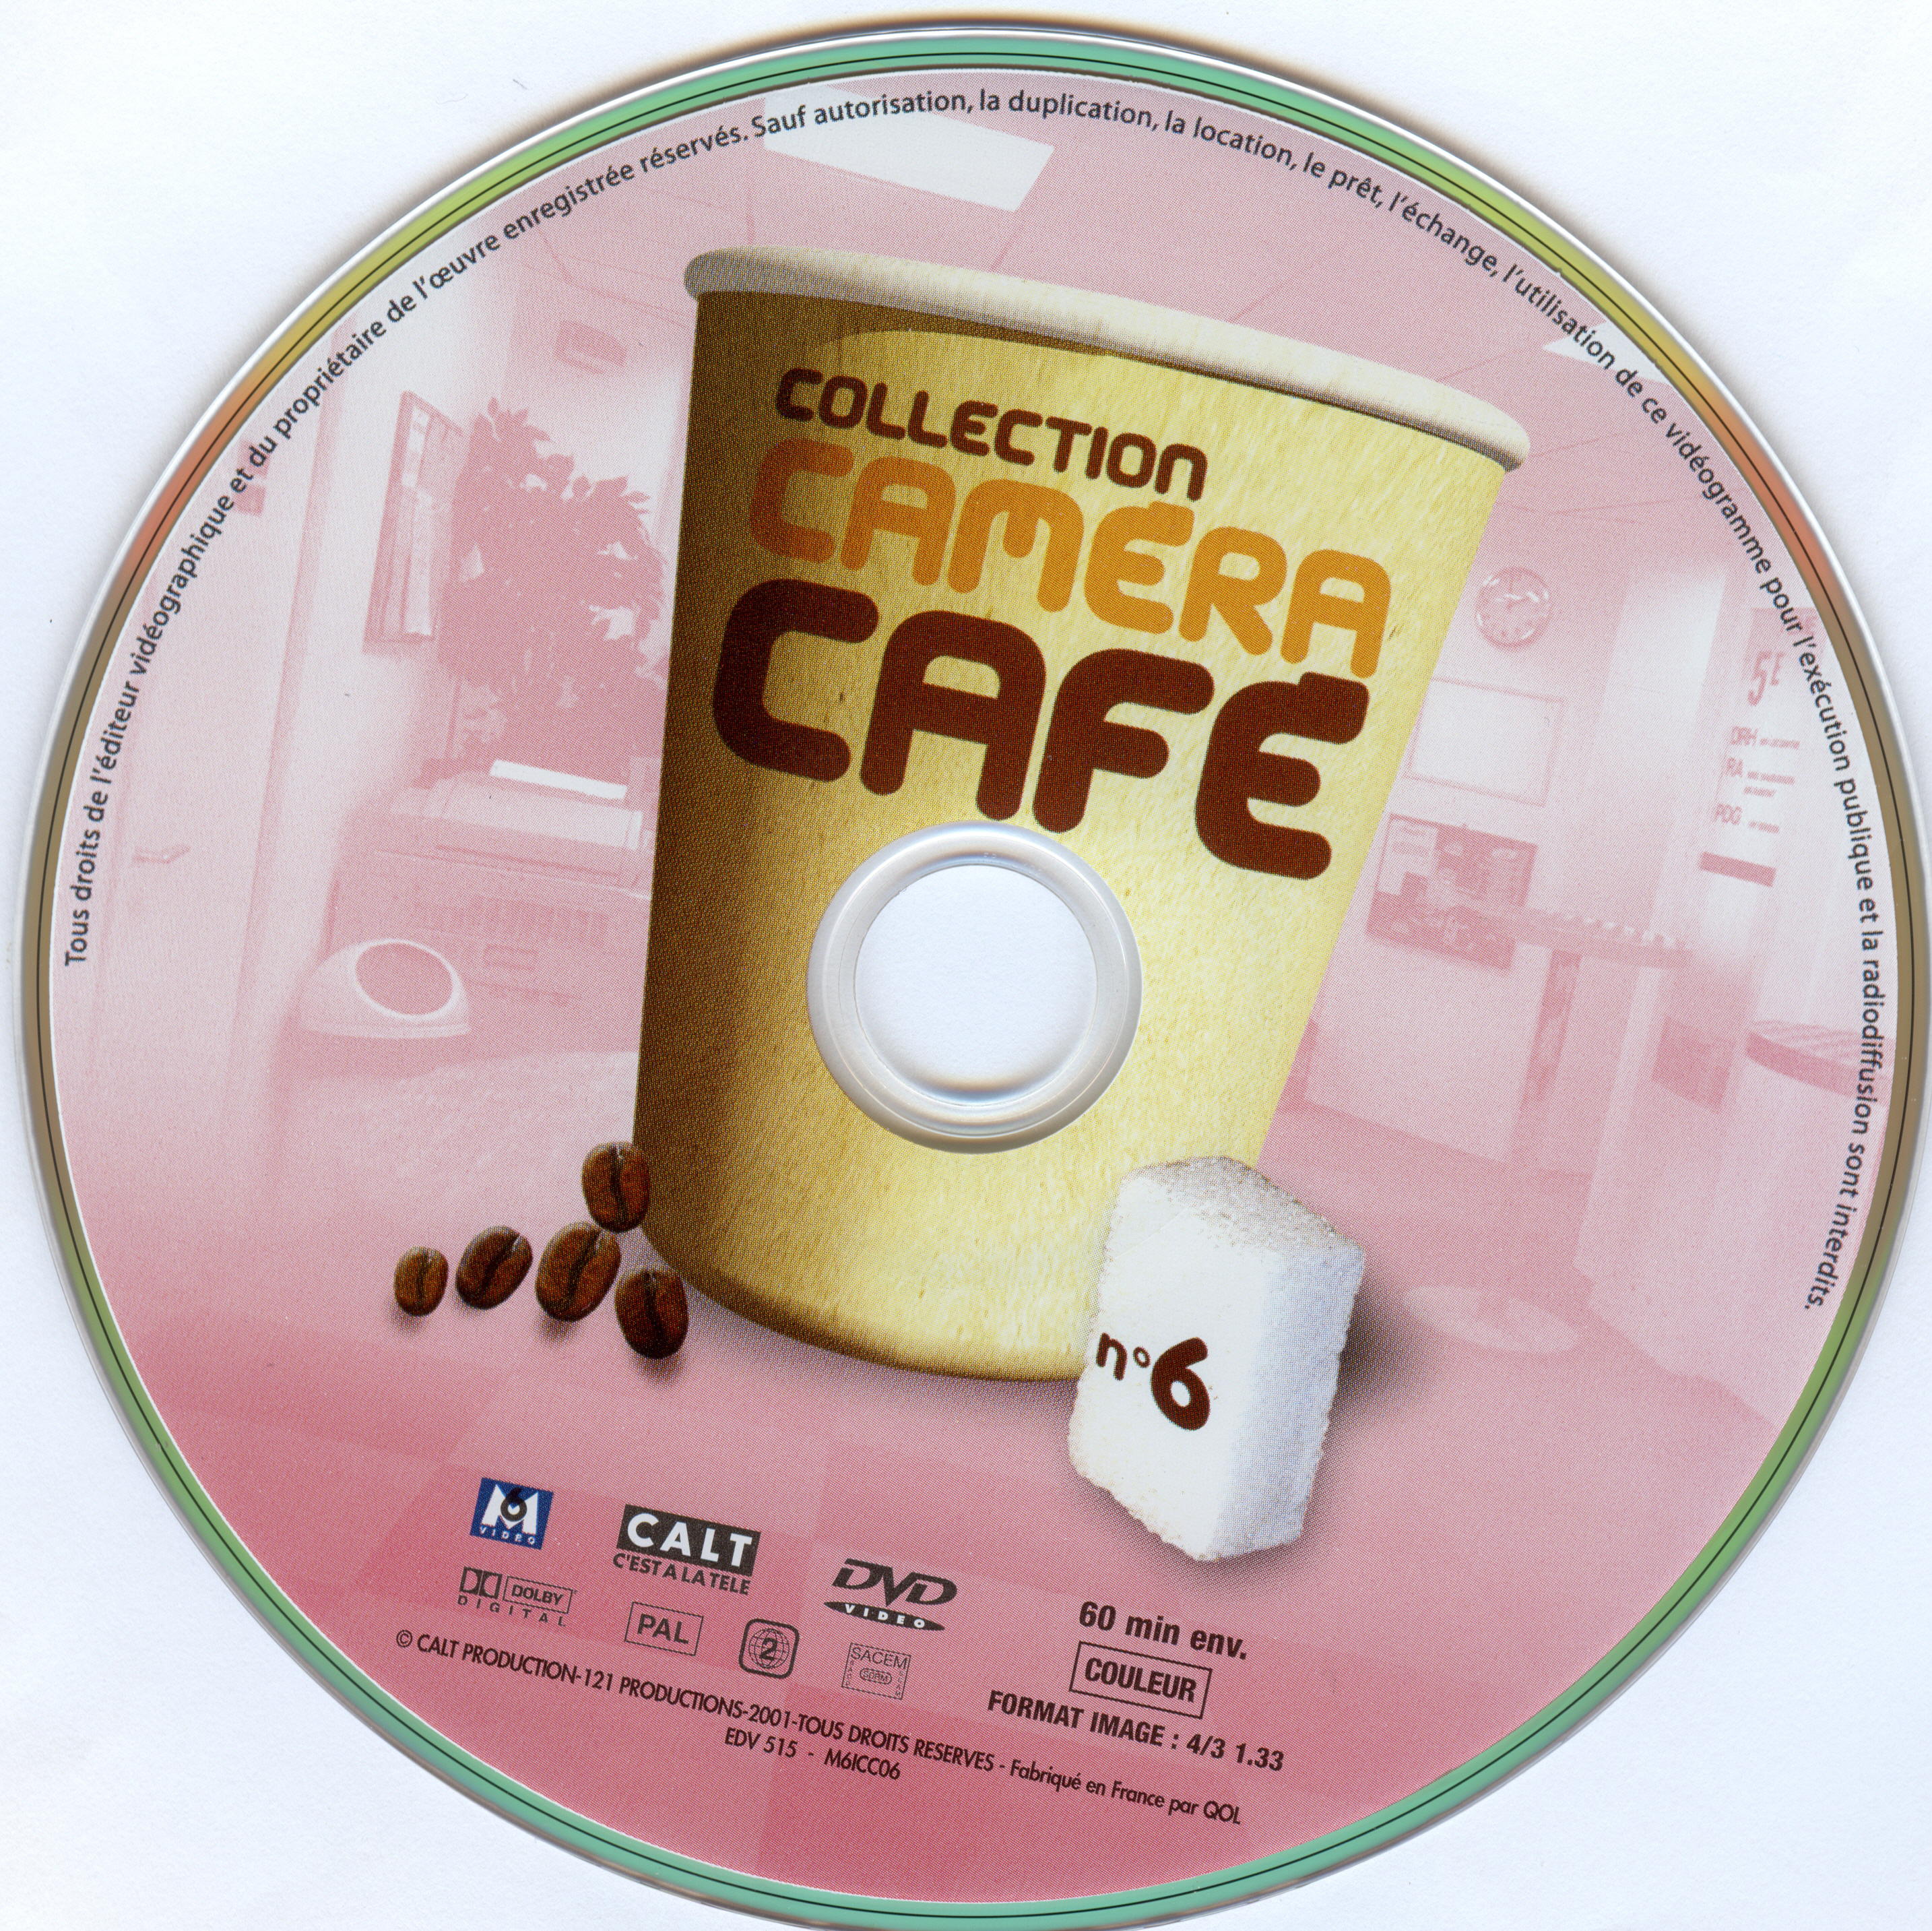 Collection Camera Cafe vol 06